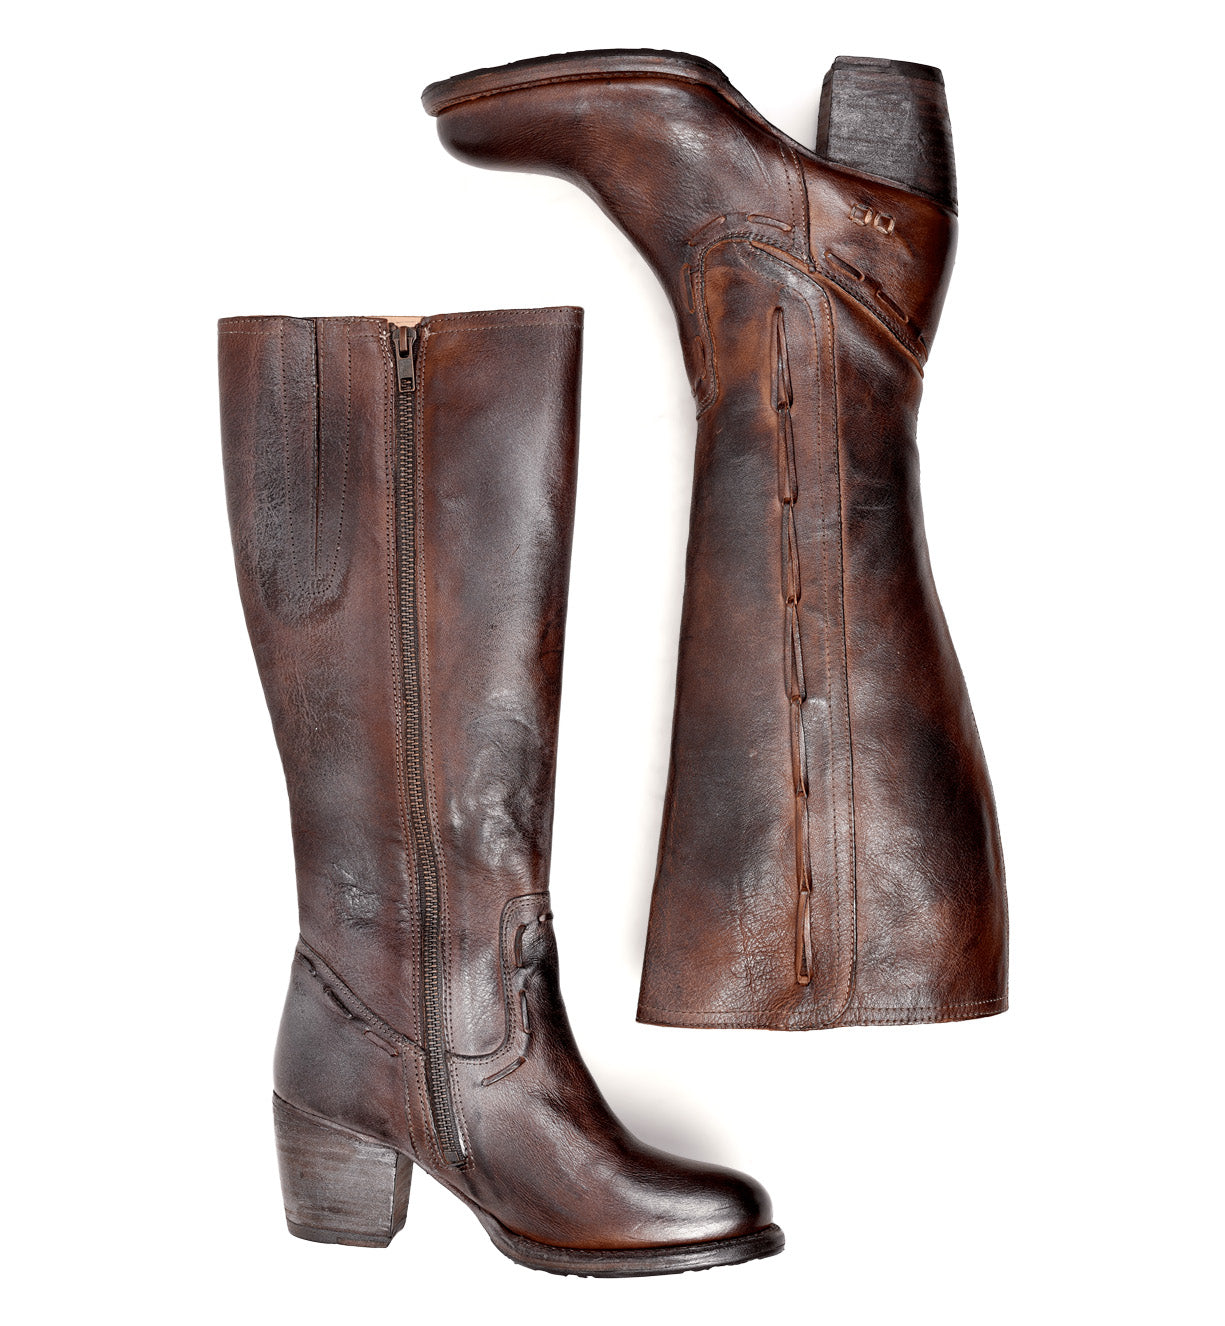 A pair of Fate brown leather boots with a zipper on the side by Bed Stu.